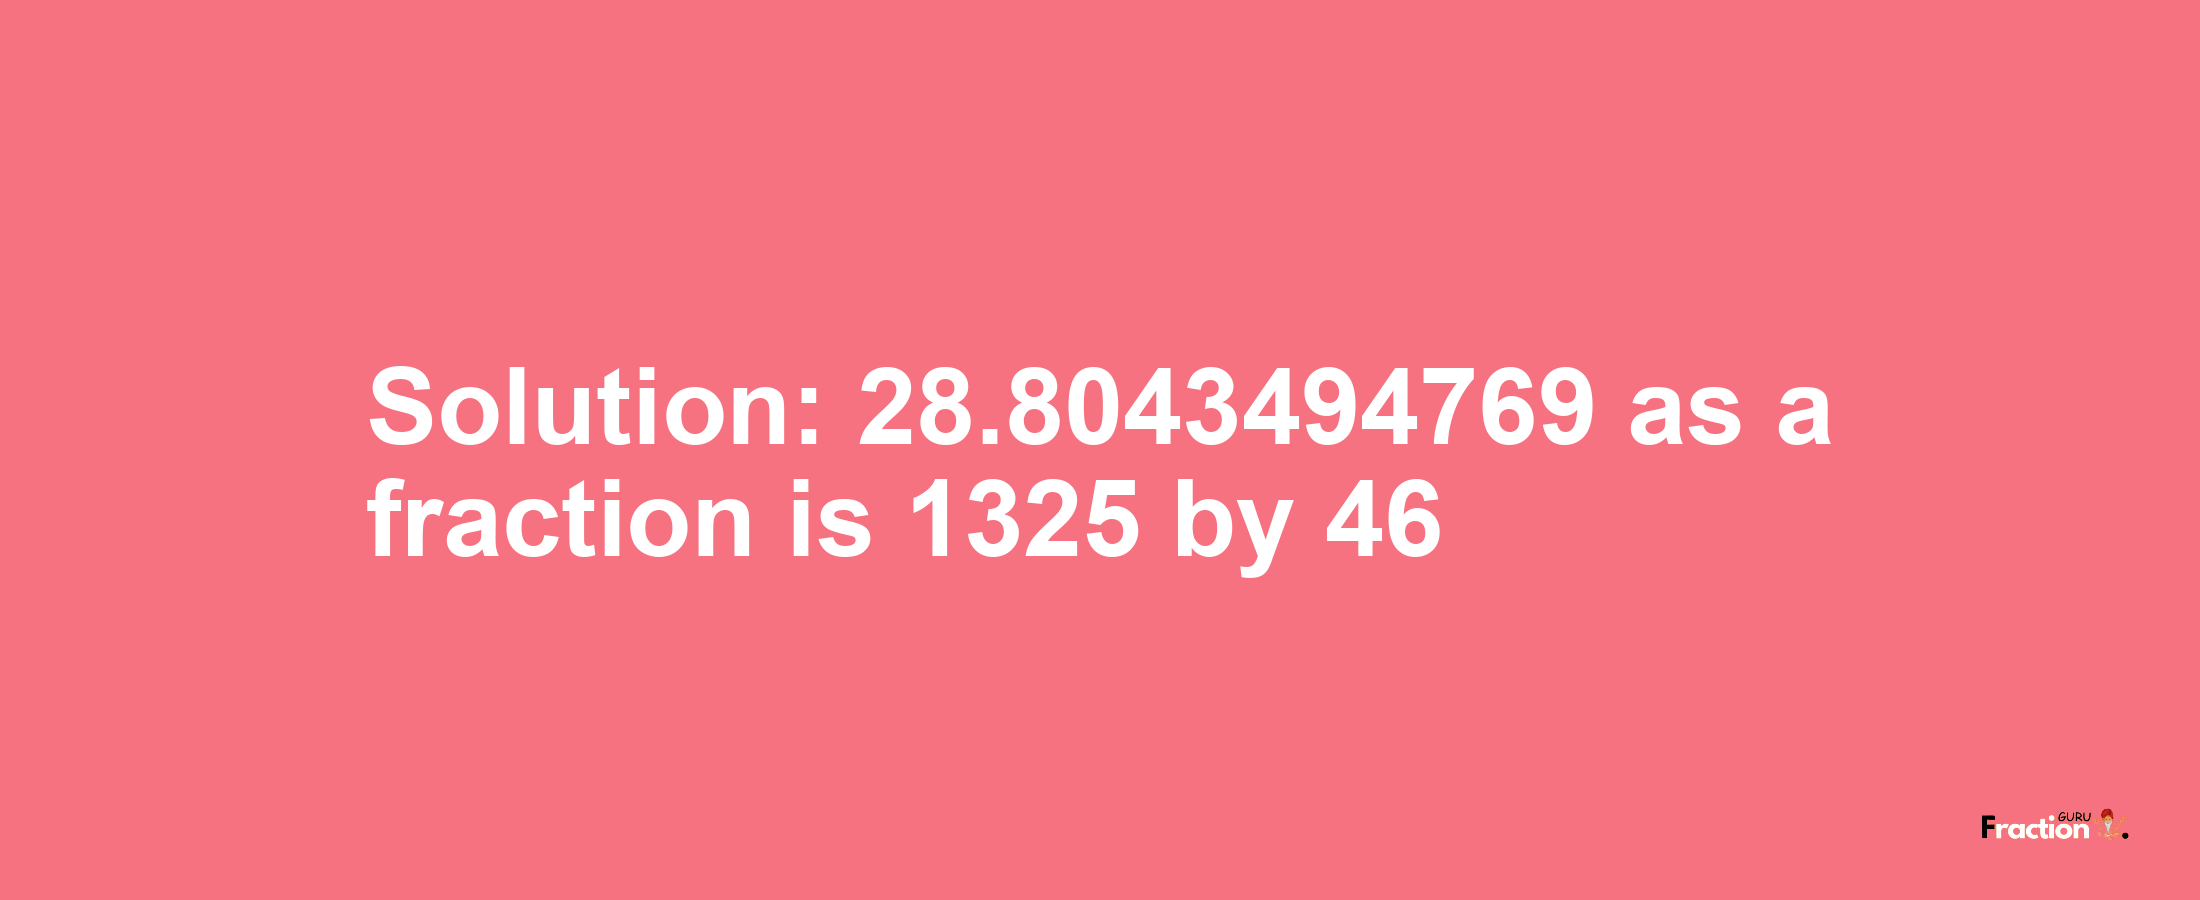 Solution:28.8043494769 as a fraction is 1325/46